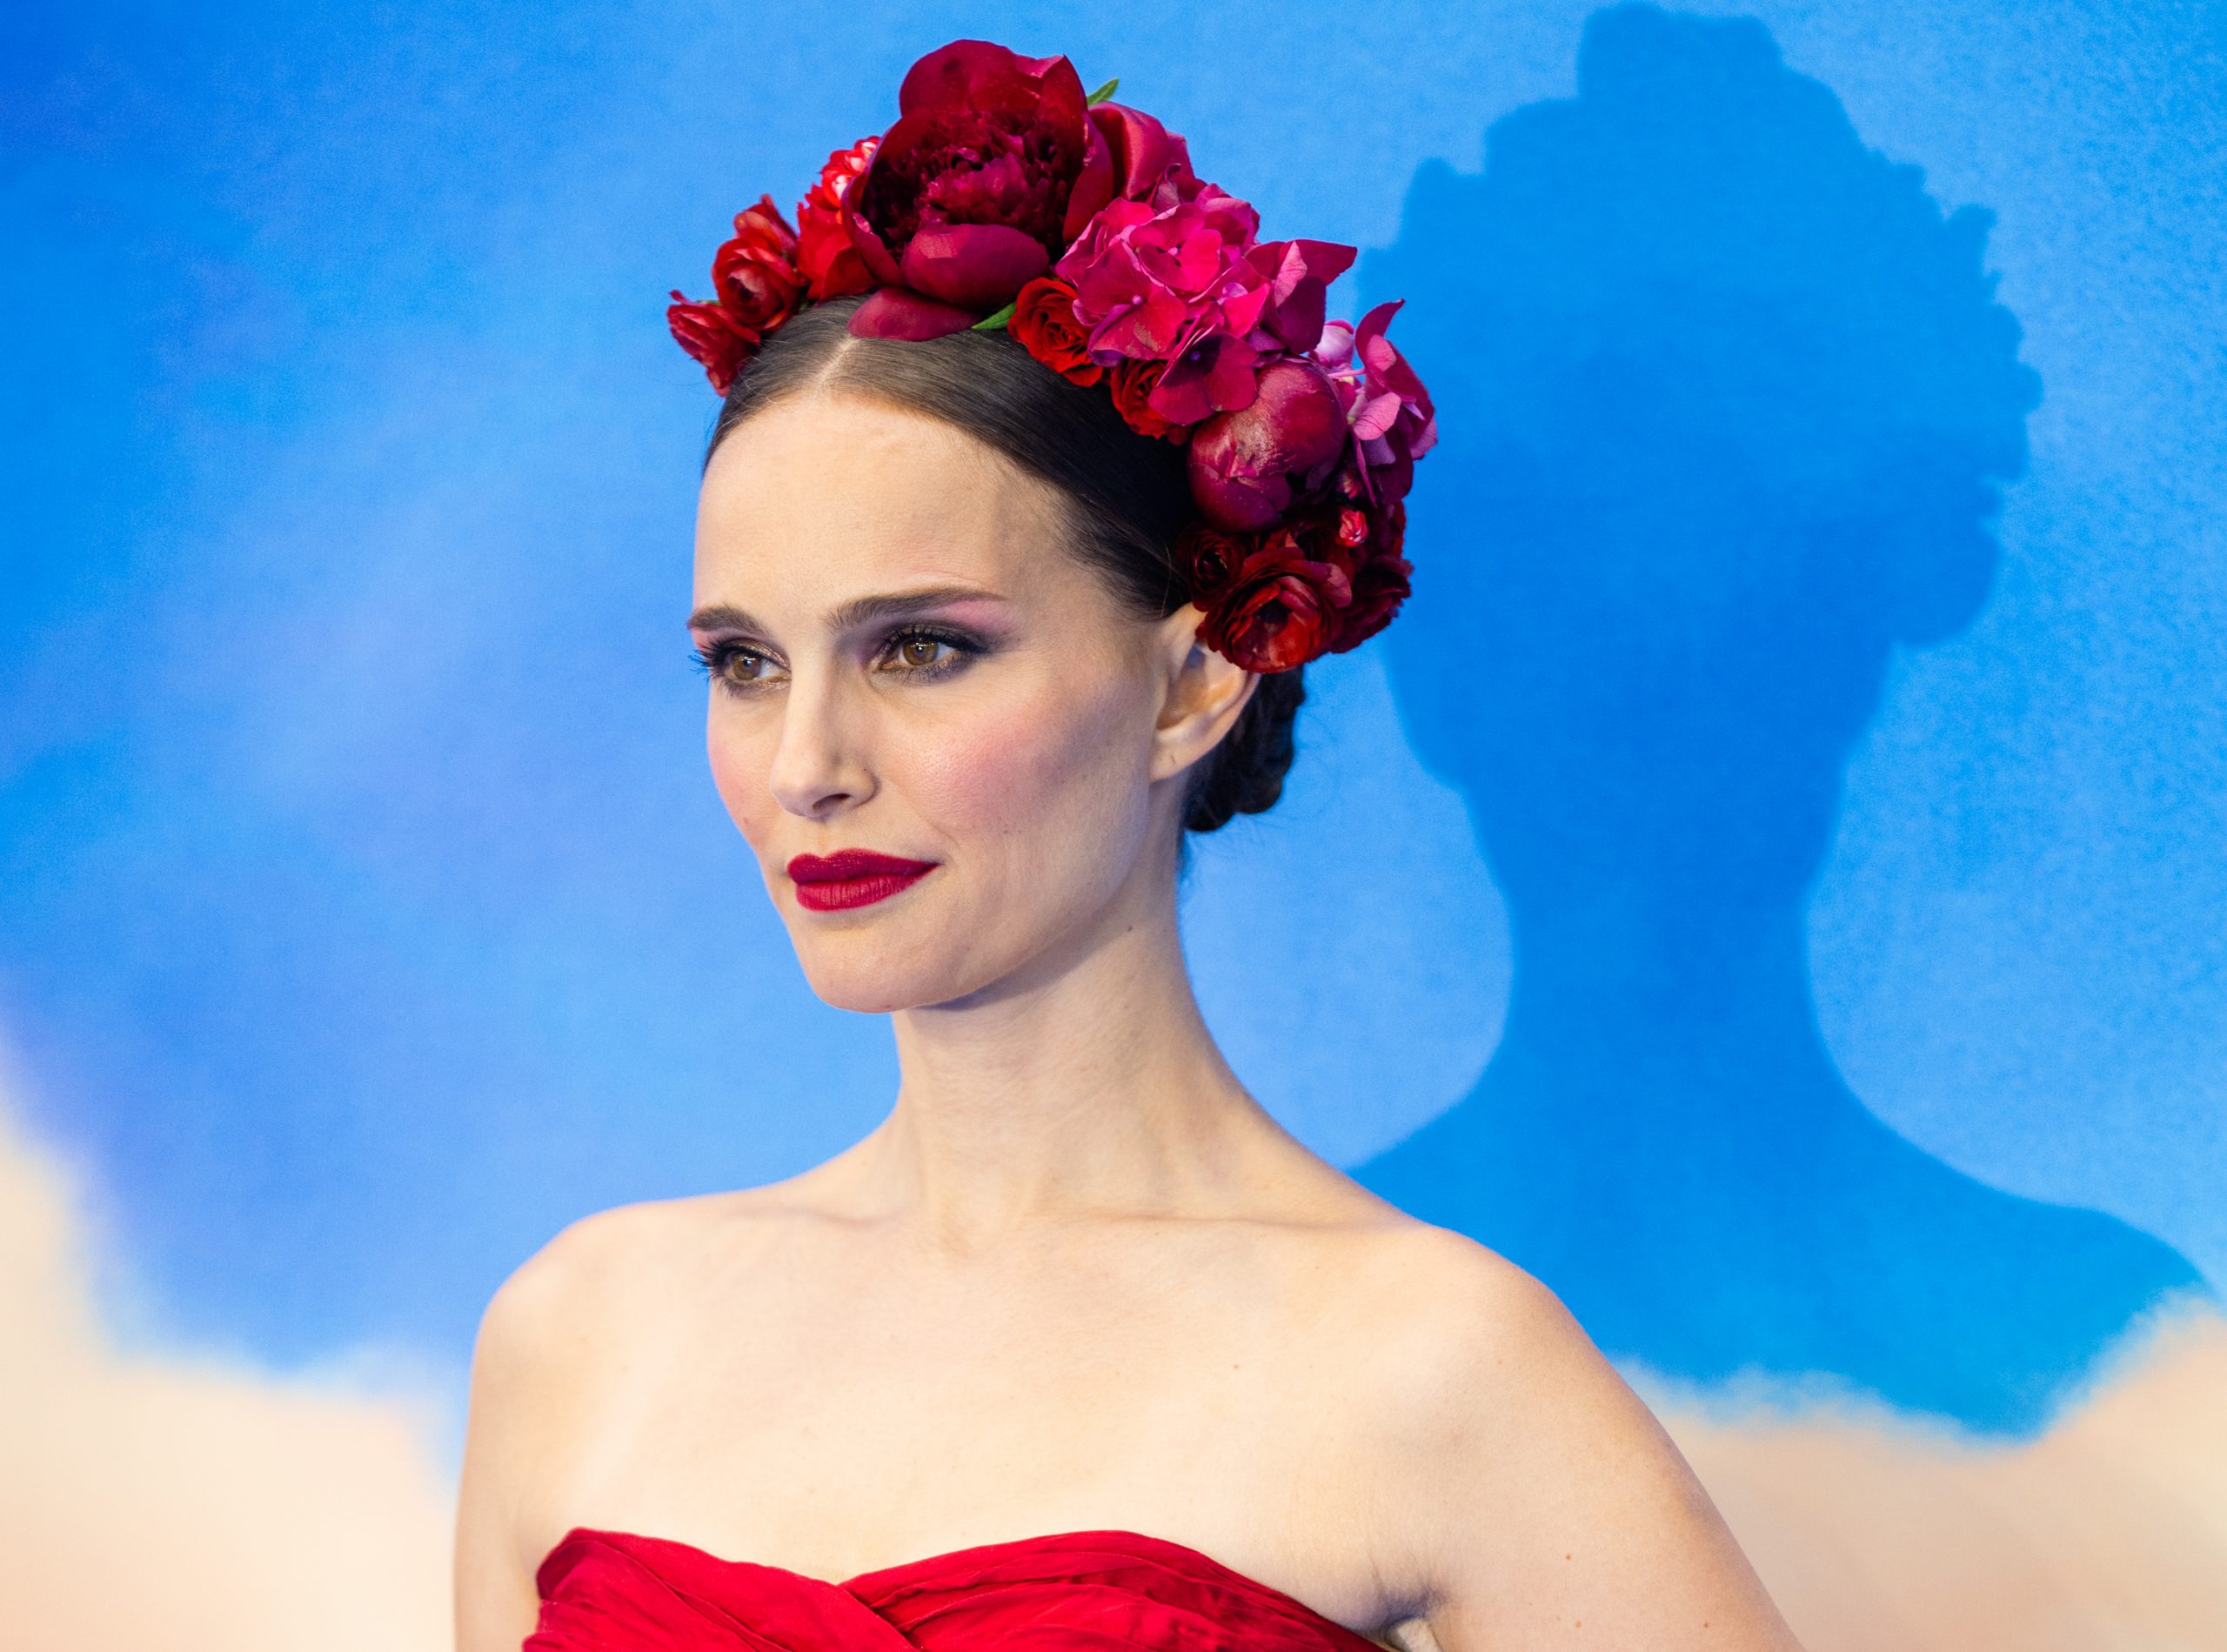 Natalie Portman, who stars in 'Thor: Love and Thunder,' wears a red strapless dress and red rose crown.